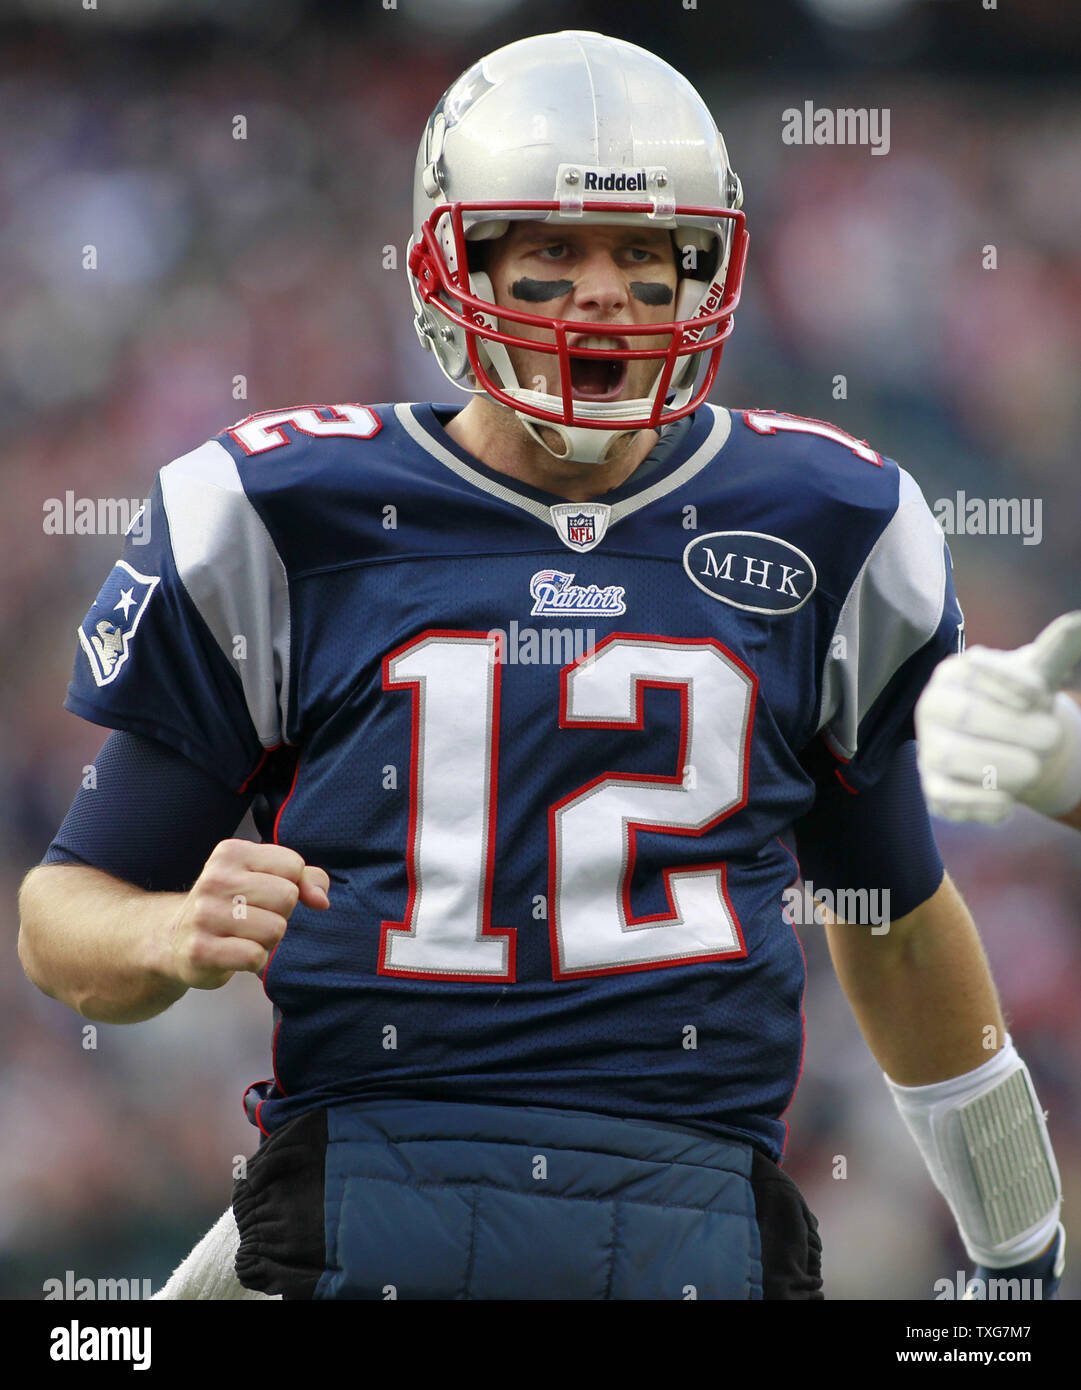 New England Patriots quarterback Tom Brady (12) celebrates a one yard touchdown by running back BenJarvus Green-Ellis in the second quarter against the Indianaoplis Colts at Gillette Stadium in Foxboro, Massachusetts on December 4, 2011.     UPI/Matthew Healey Stock Photo